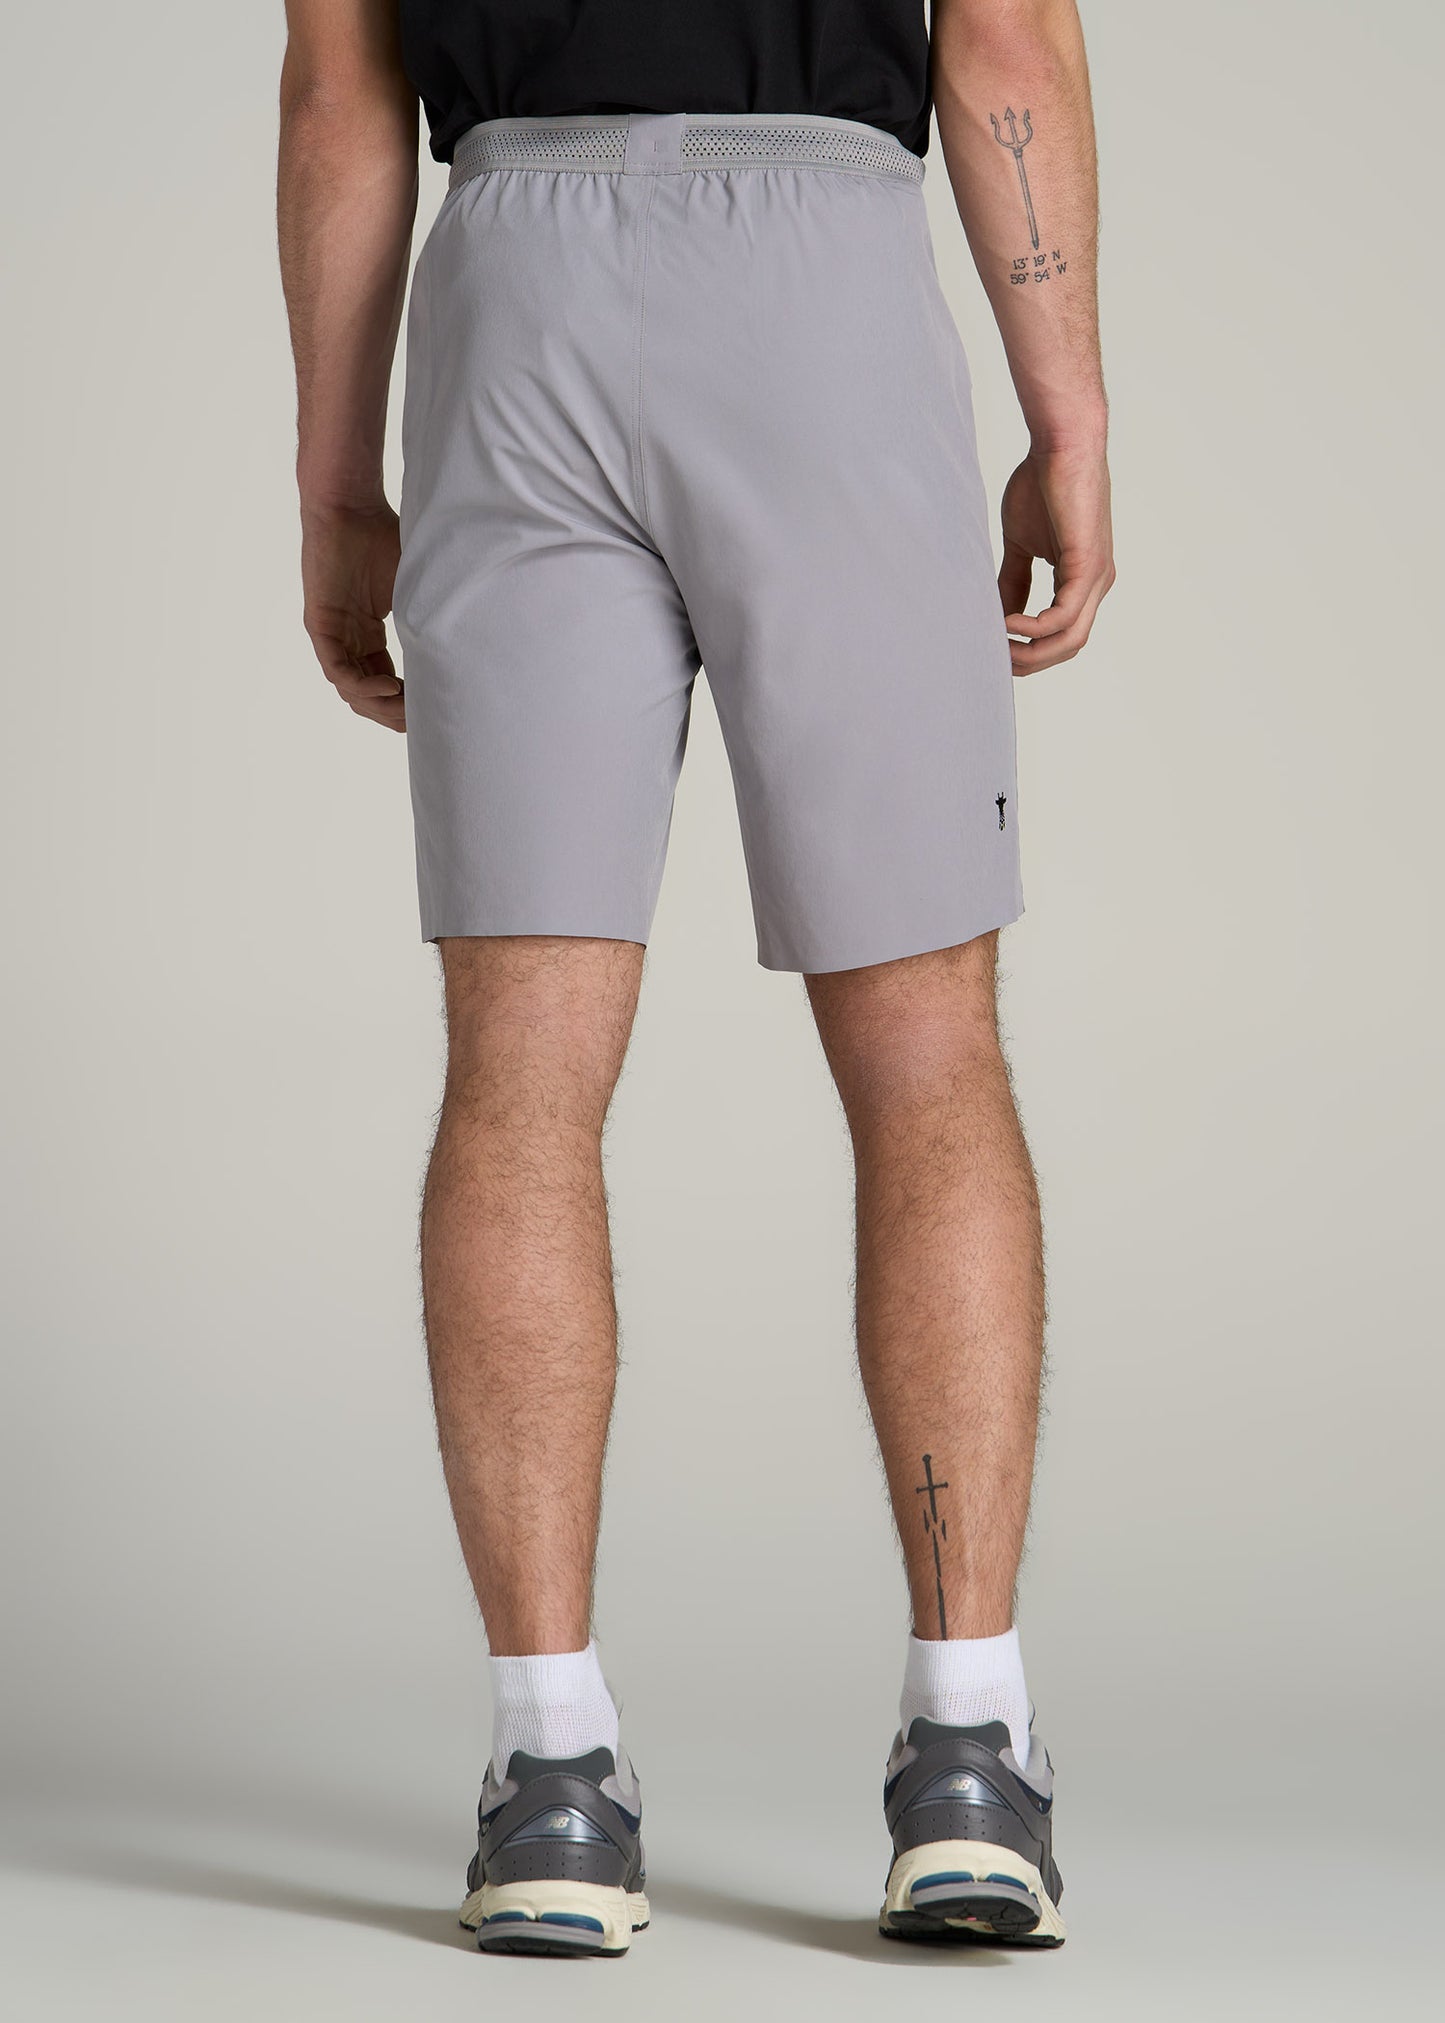 Featherweight Perforated Training Shorts for Tall Men